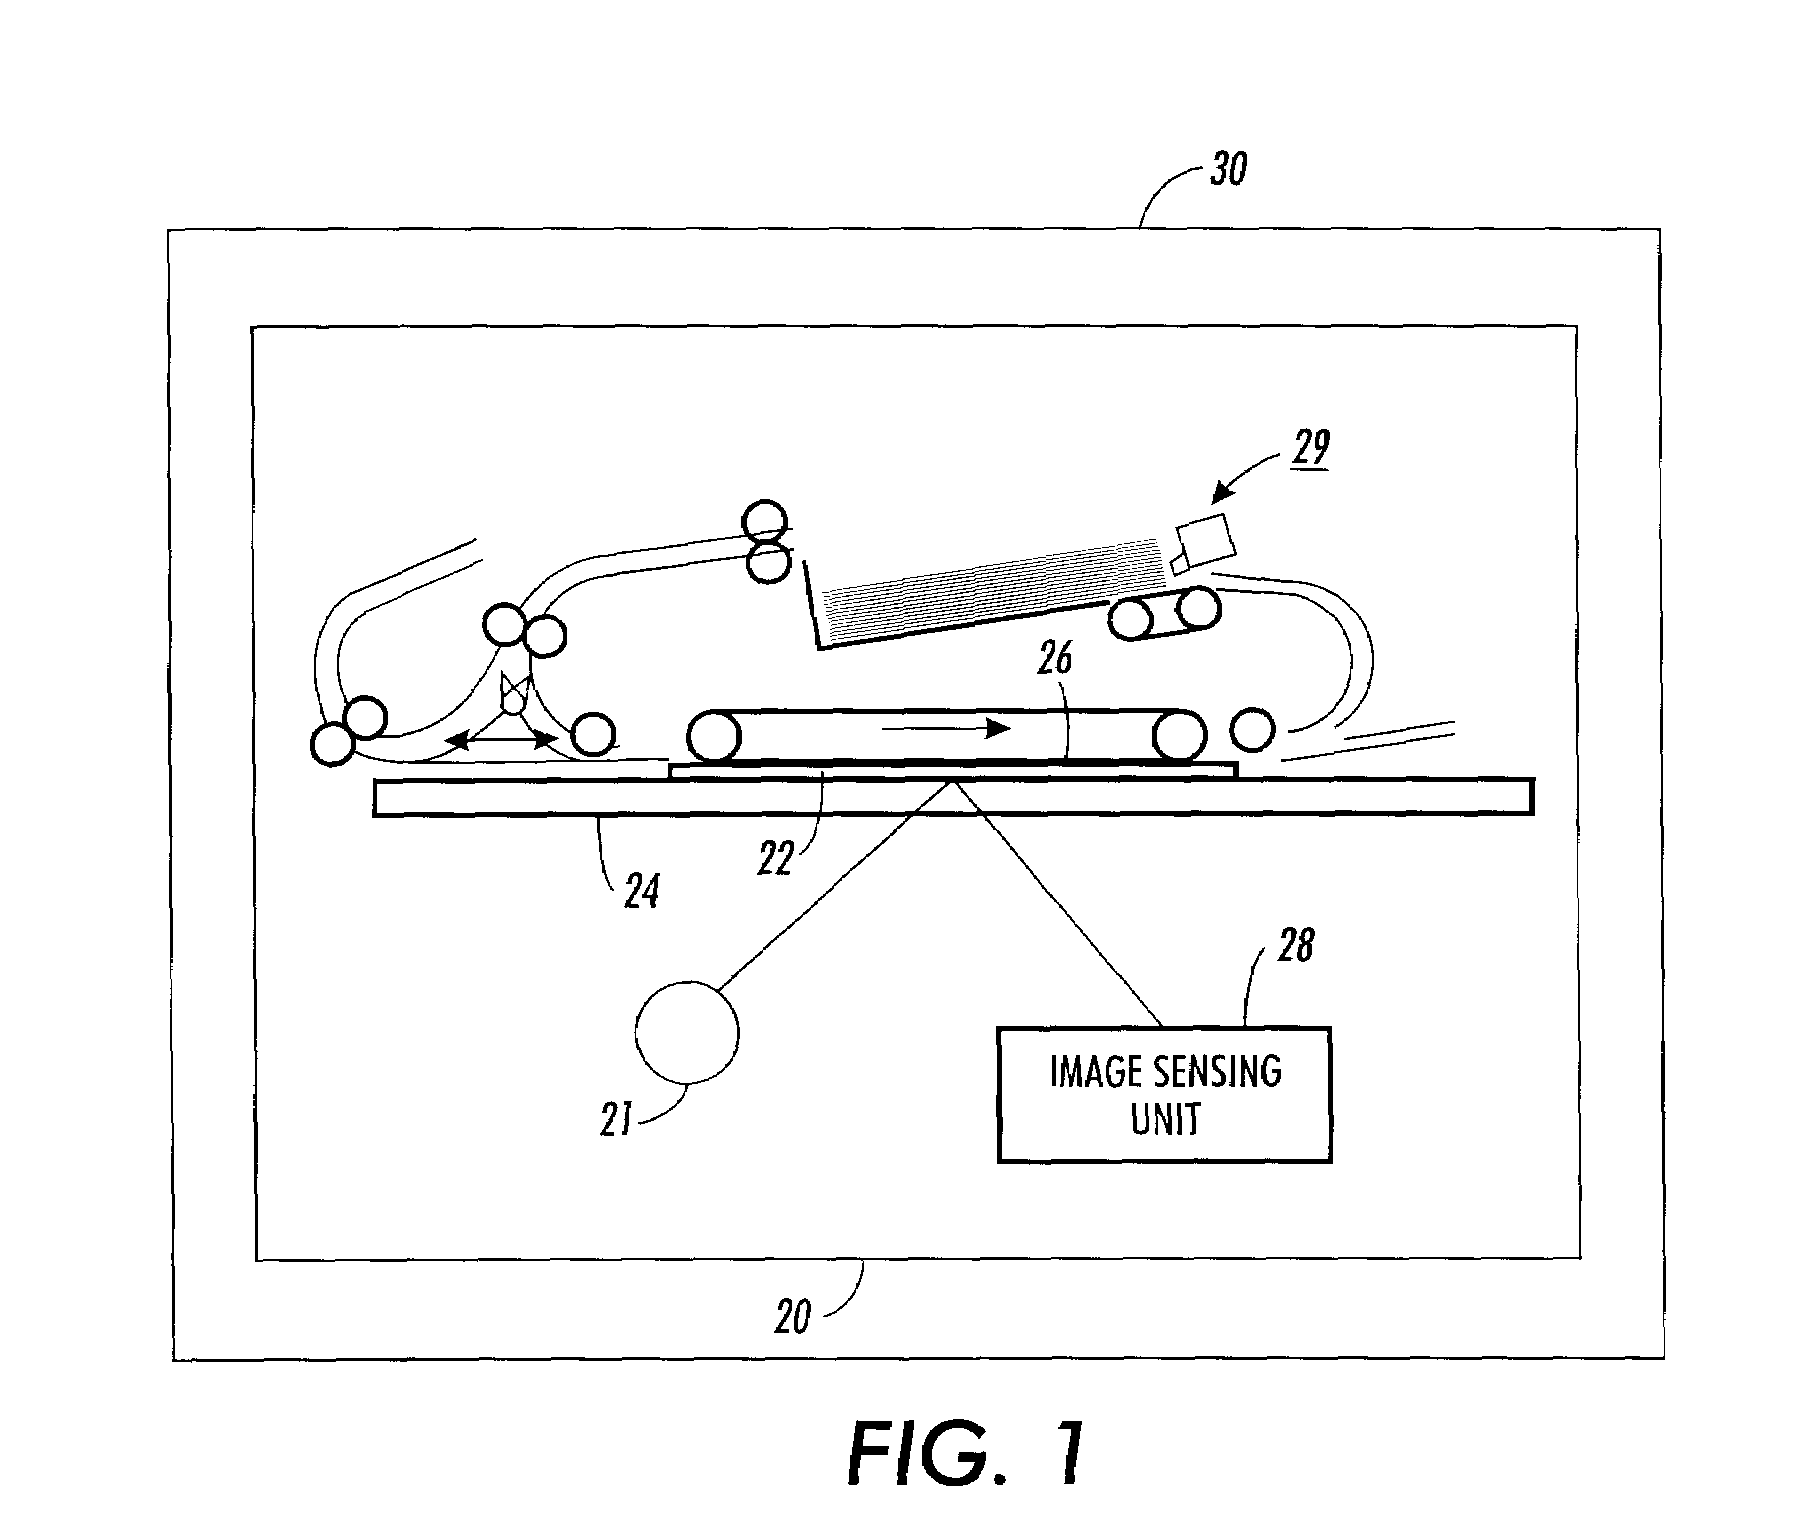 Systems and methods that alter electronic data based on availability of time